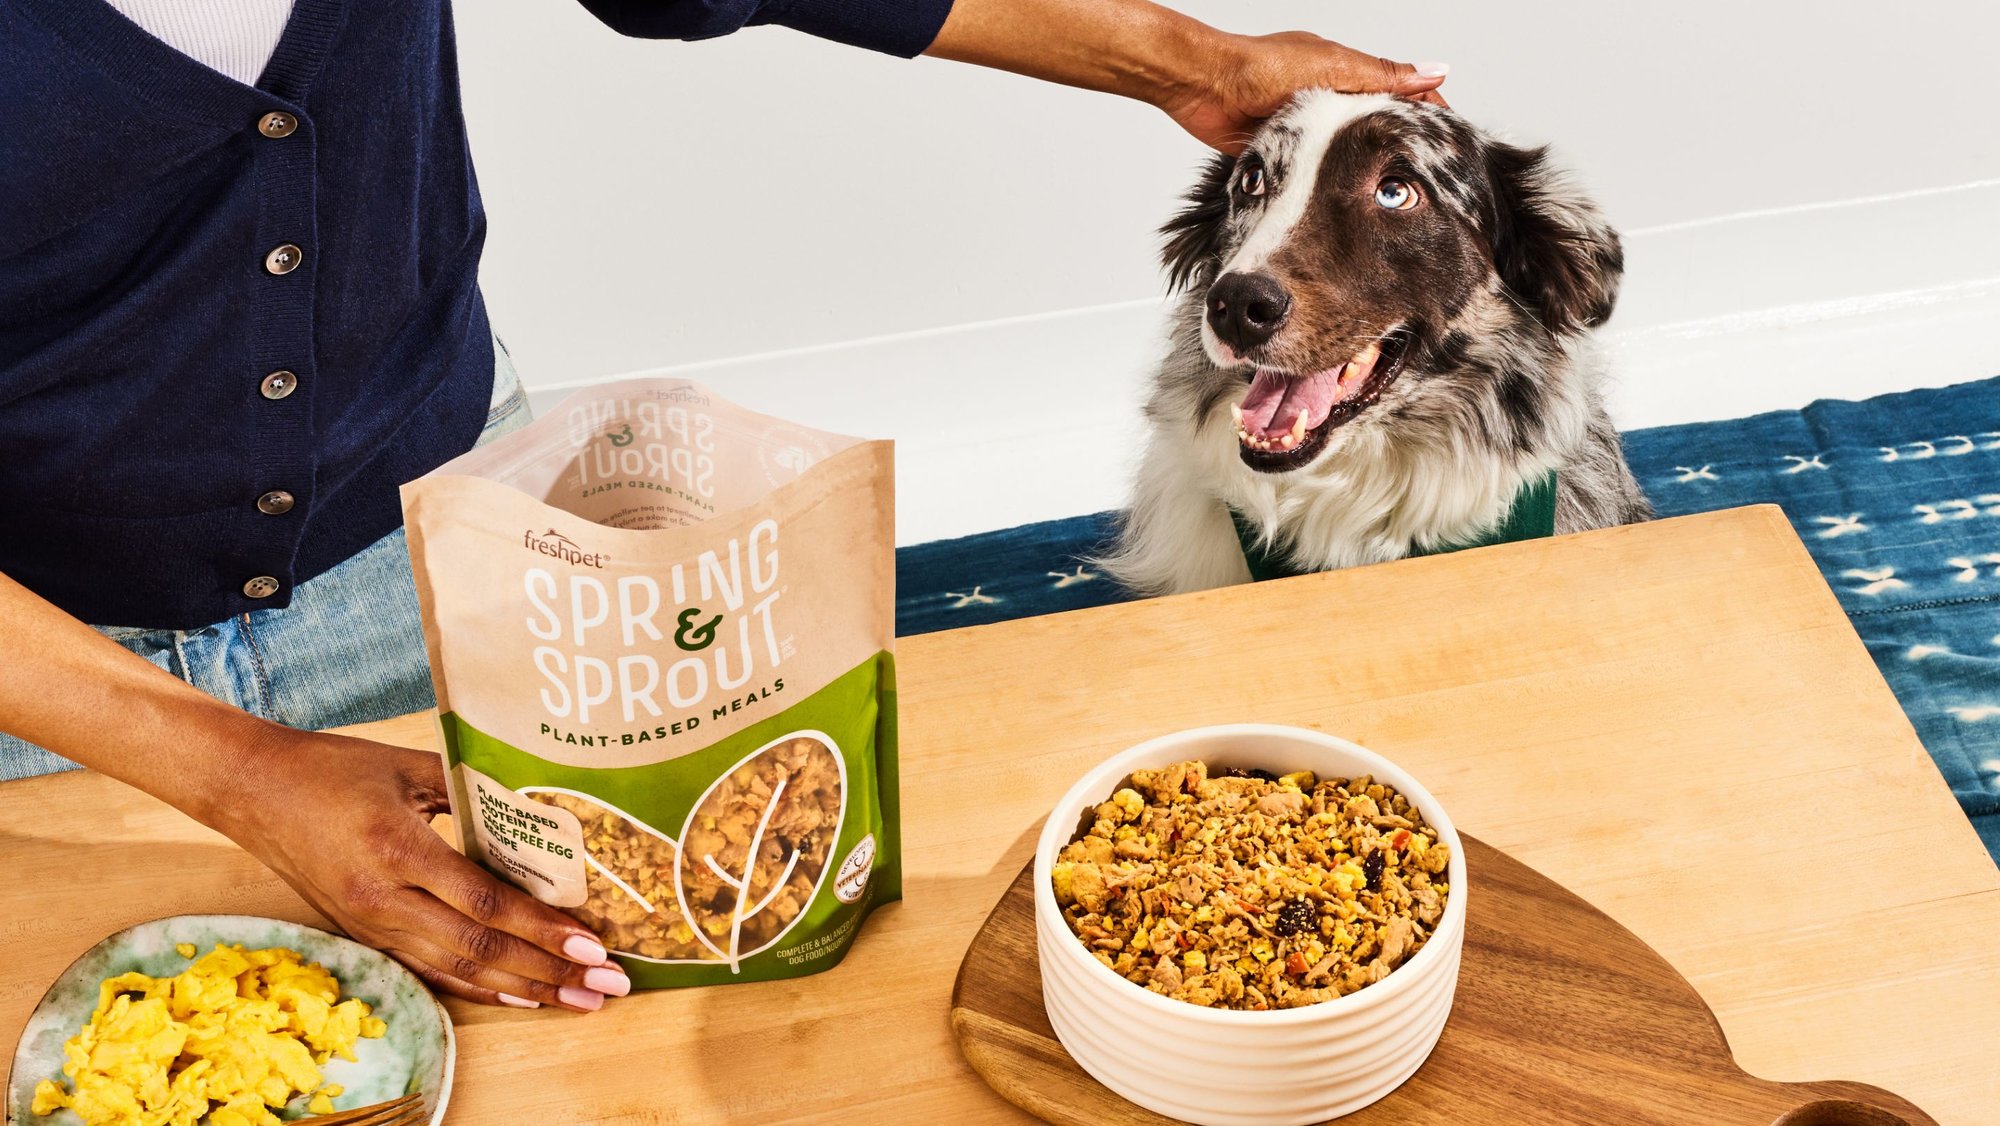 A black and white dog being pet with a bag and bowl of Freshpet Spring & Sprout in the foreground. 